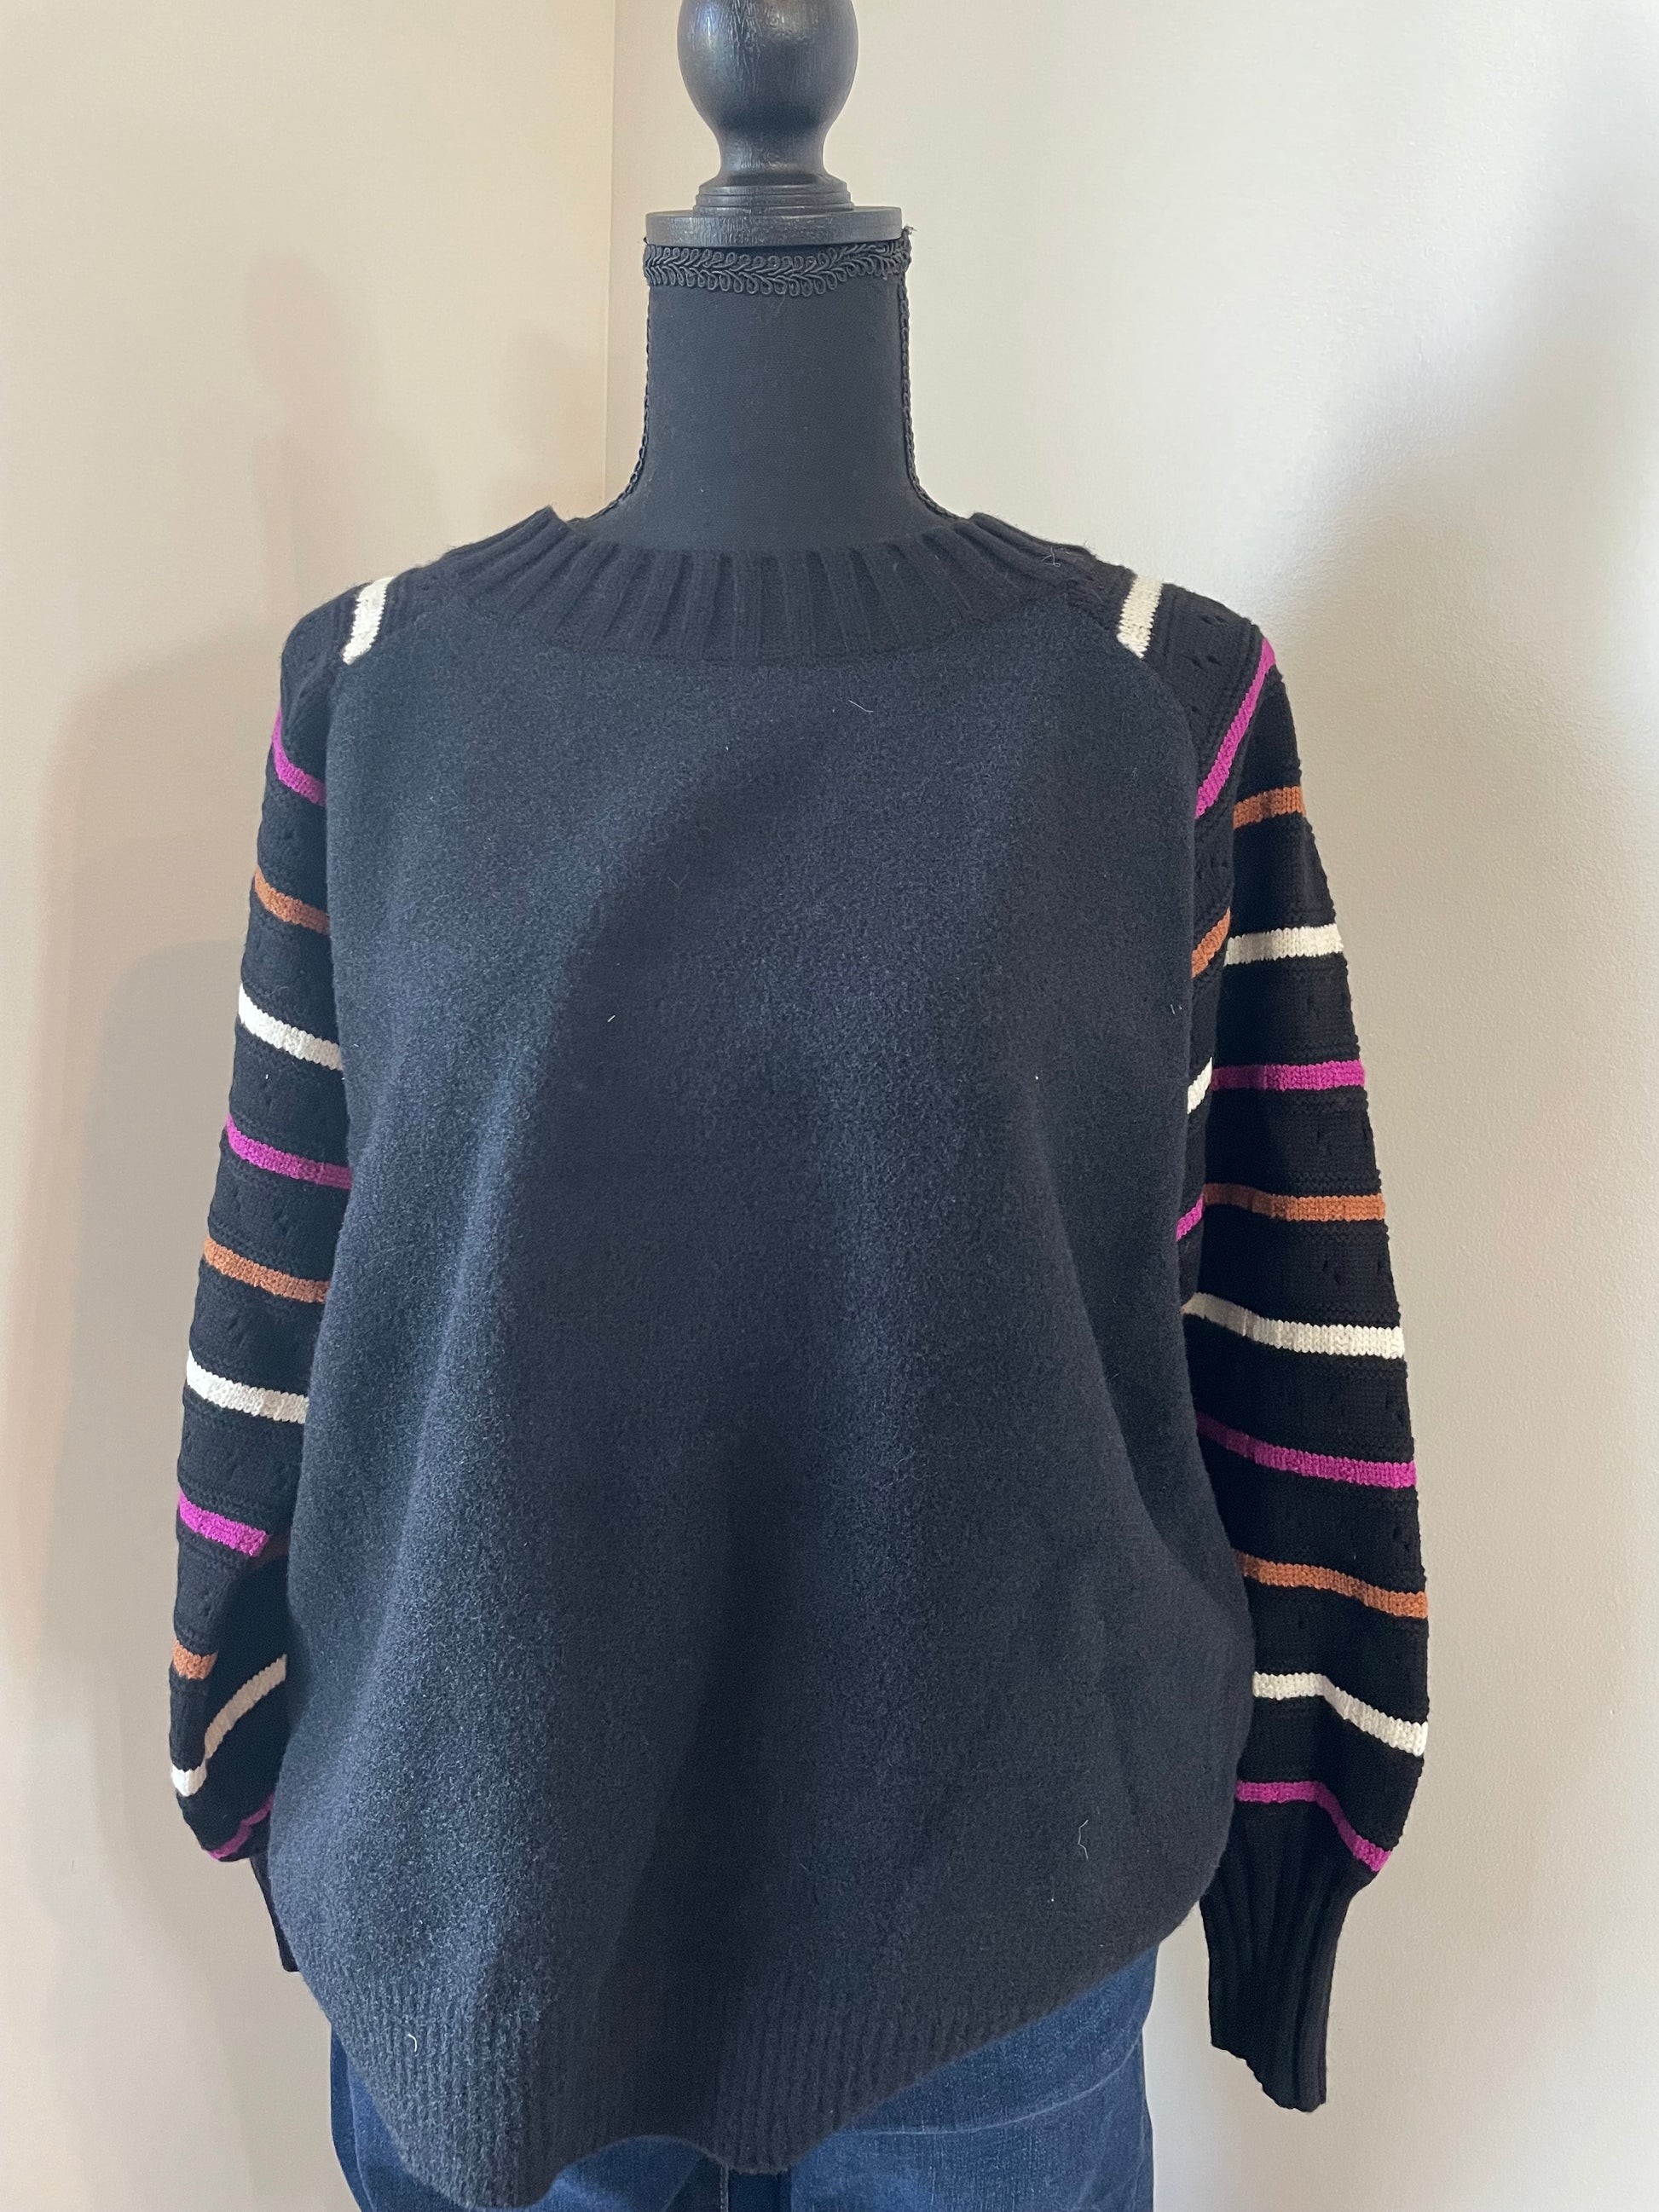 mannequin view of Relaxed fit pullover with ribbed neck, sleeve, and waist details. Features balloon sleeves for added style.